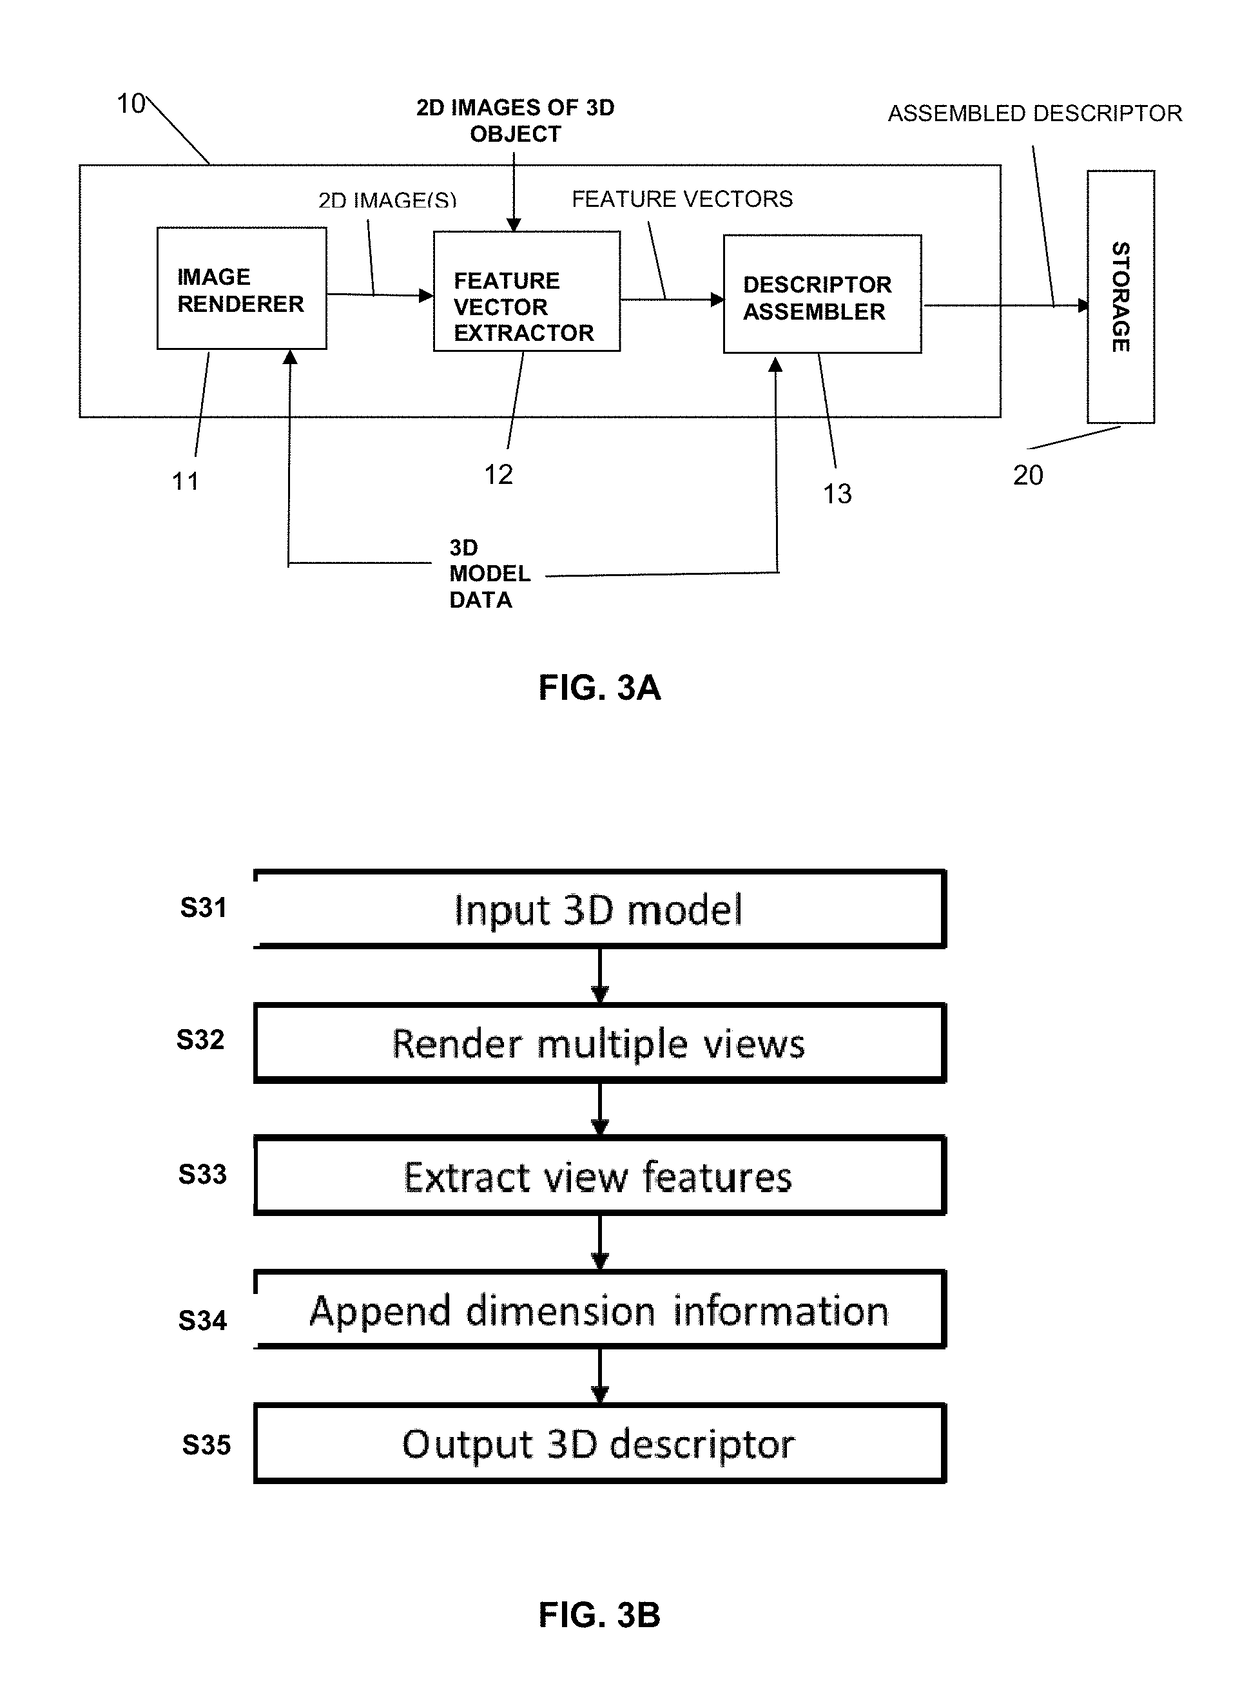 Method and apparatus for searching a database of 3D items using descriptors